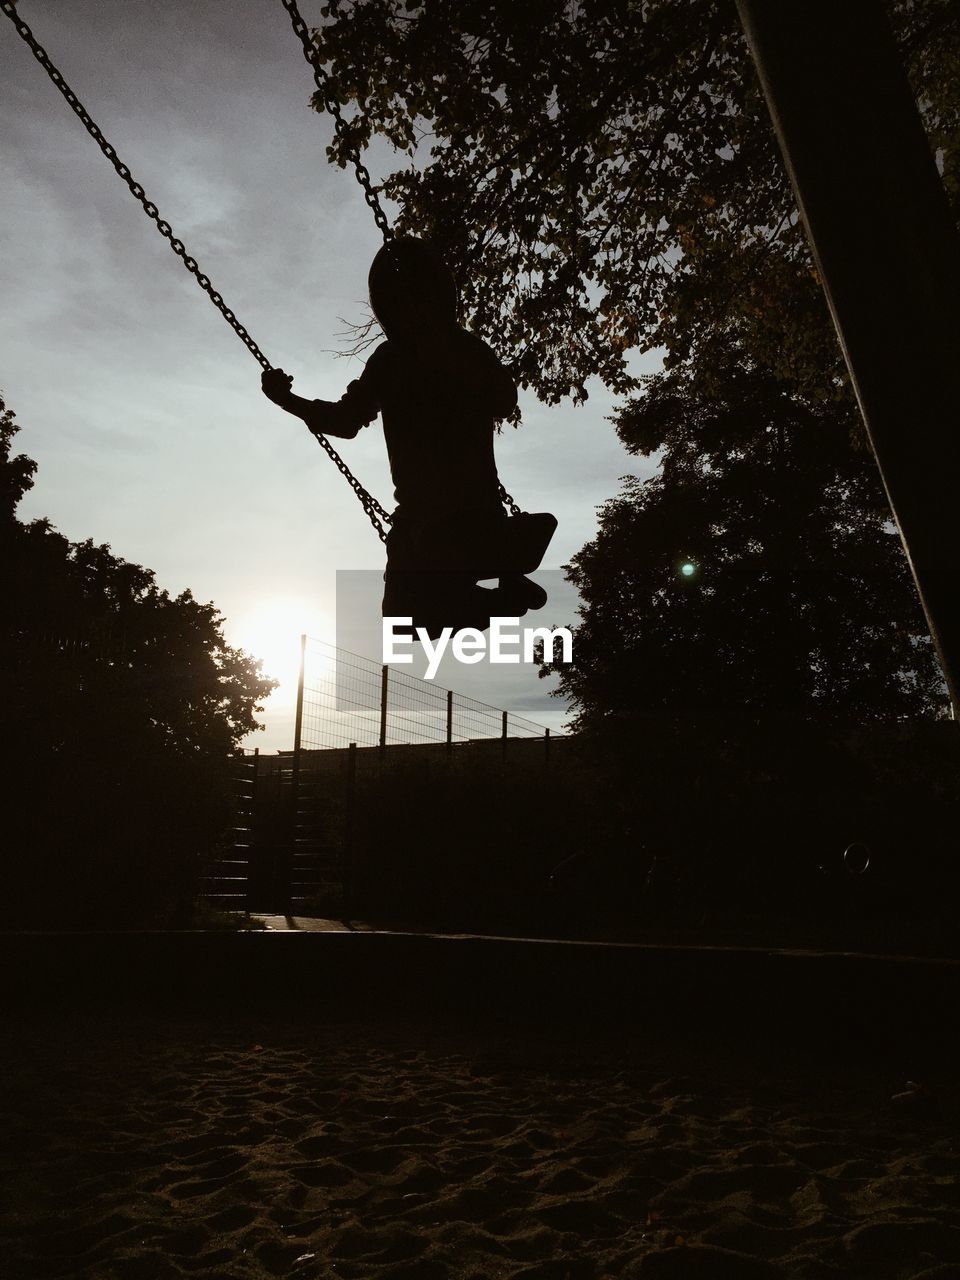 Silhouette boy on swing against trees and sky